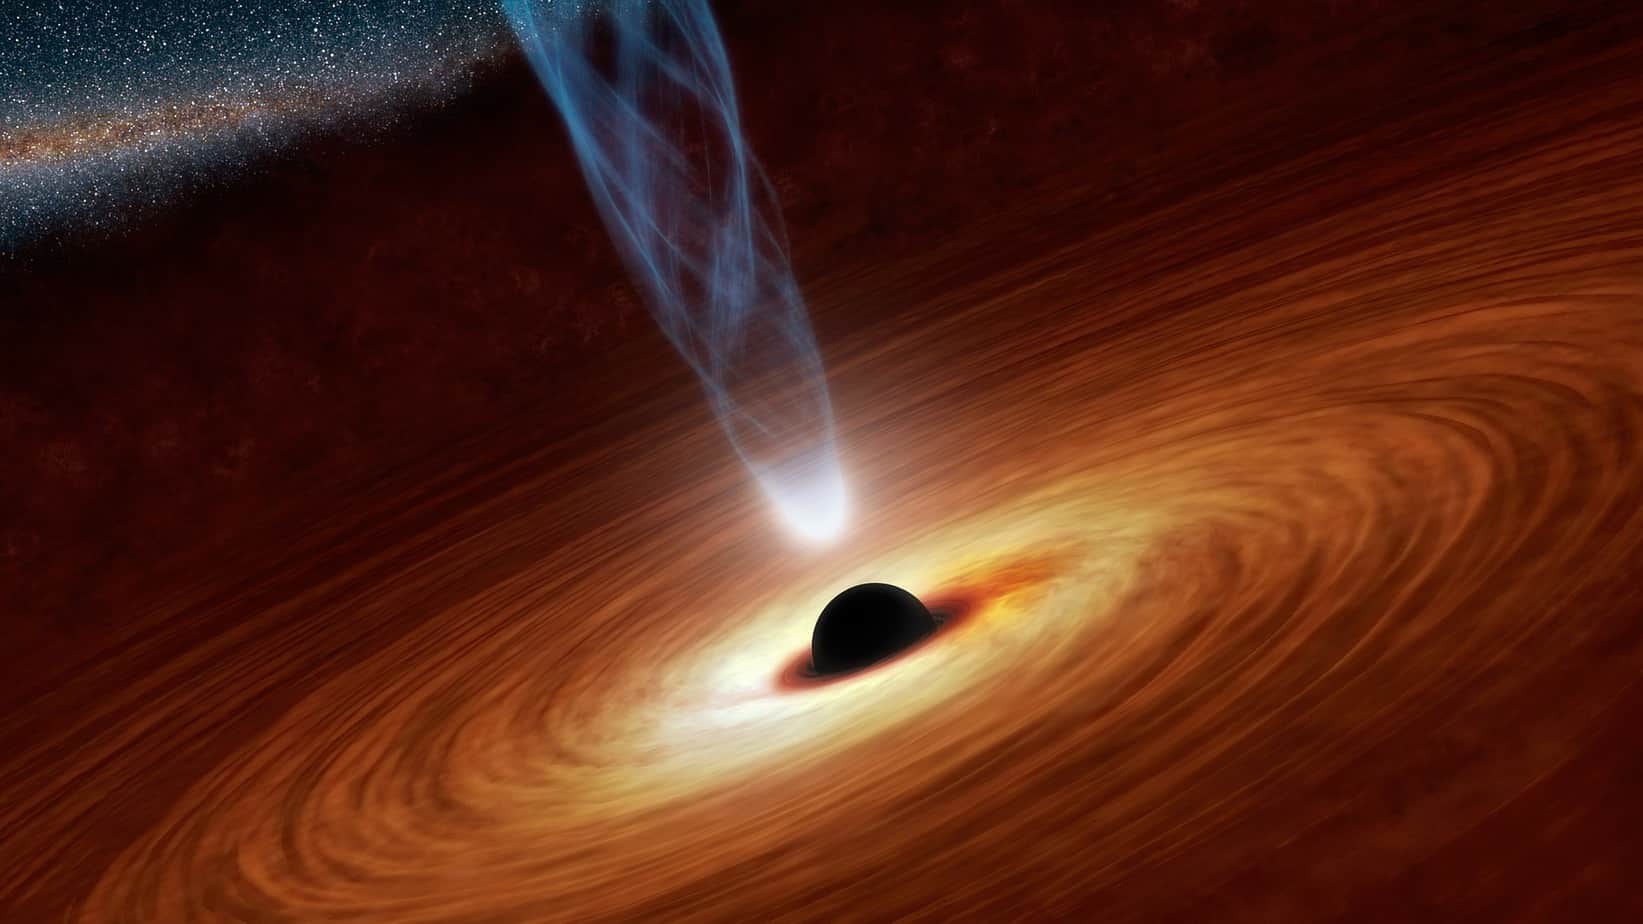 Indian, US scientists identify a black hole that spins near maximum possible rates